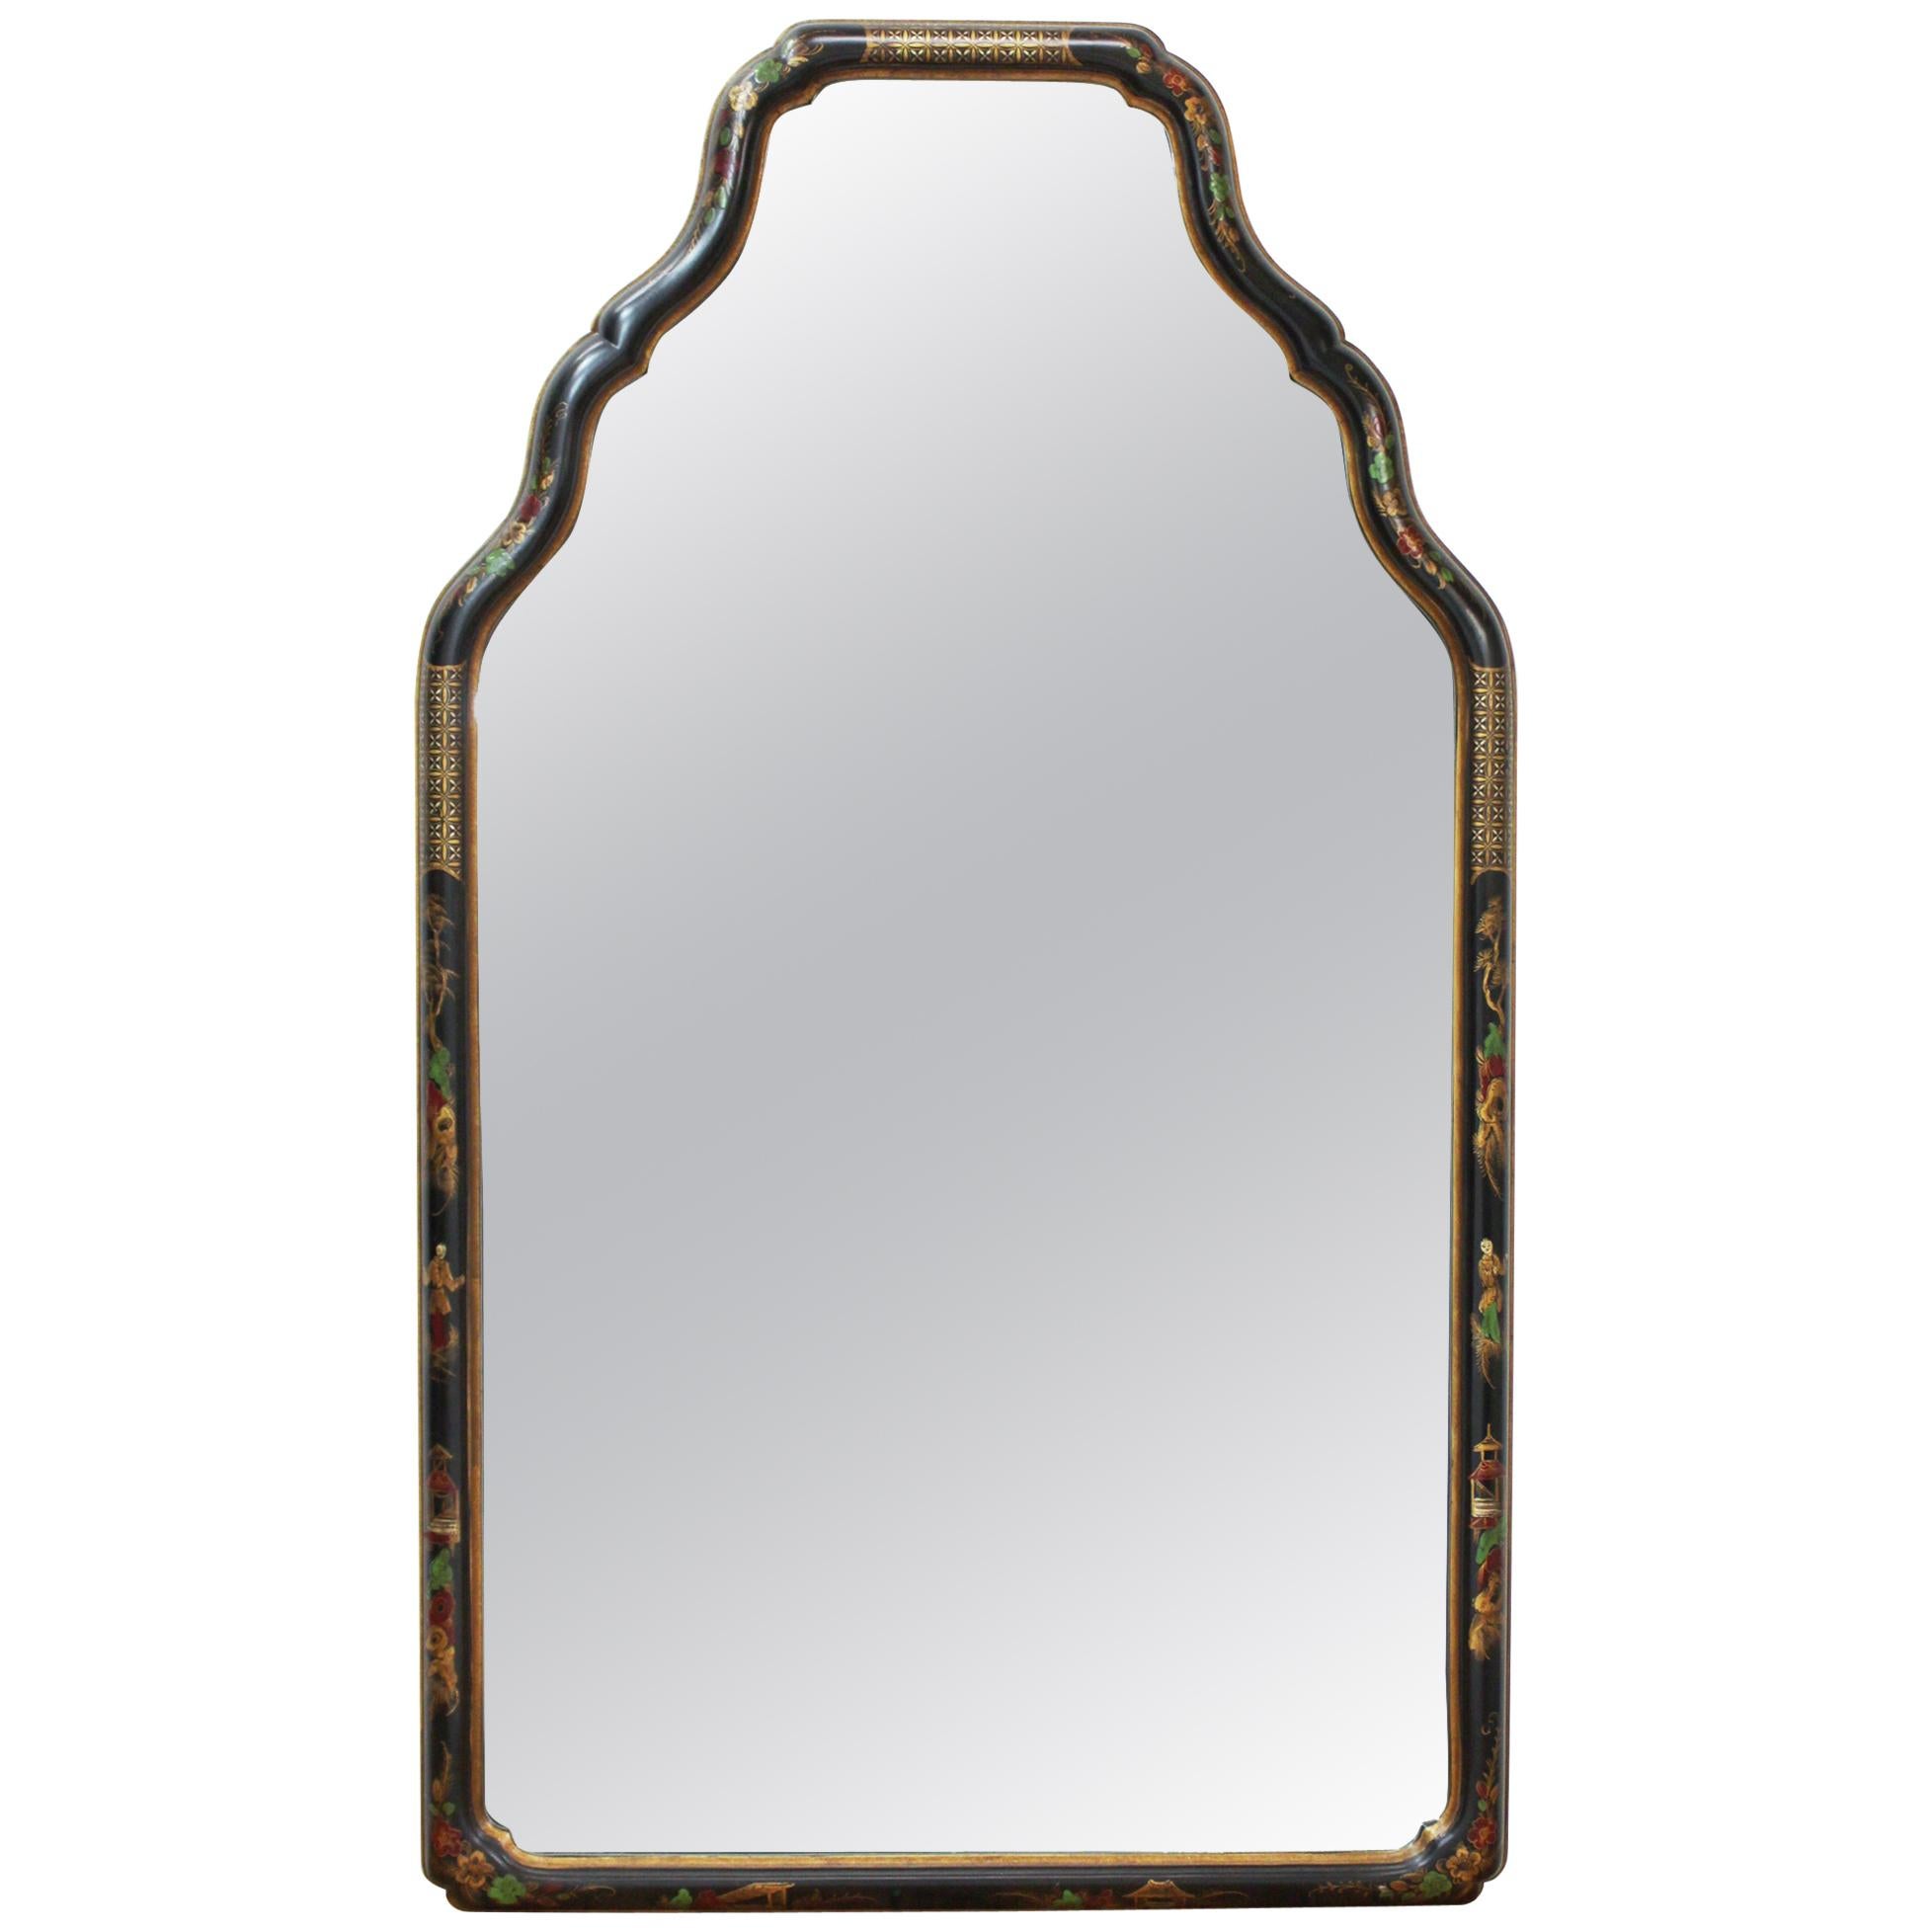 Queen Anne Chinoiserie Style Wall Mirror with Lacquered Border